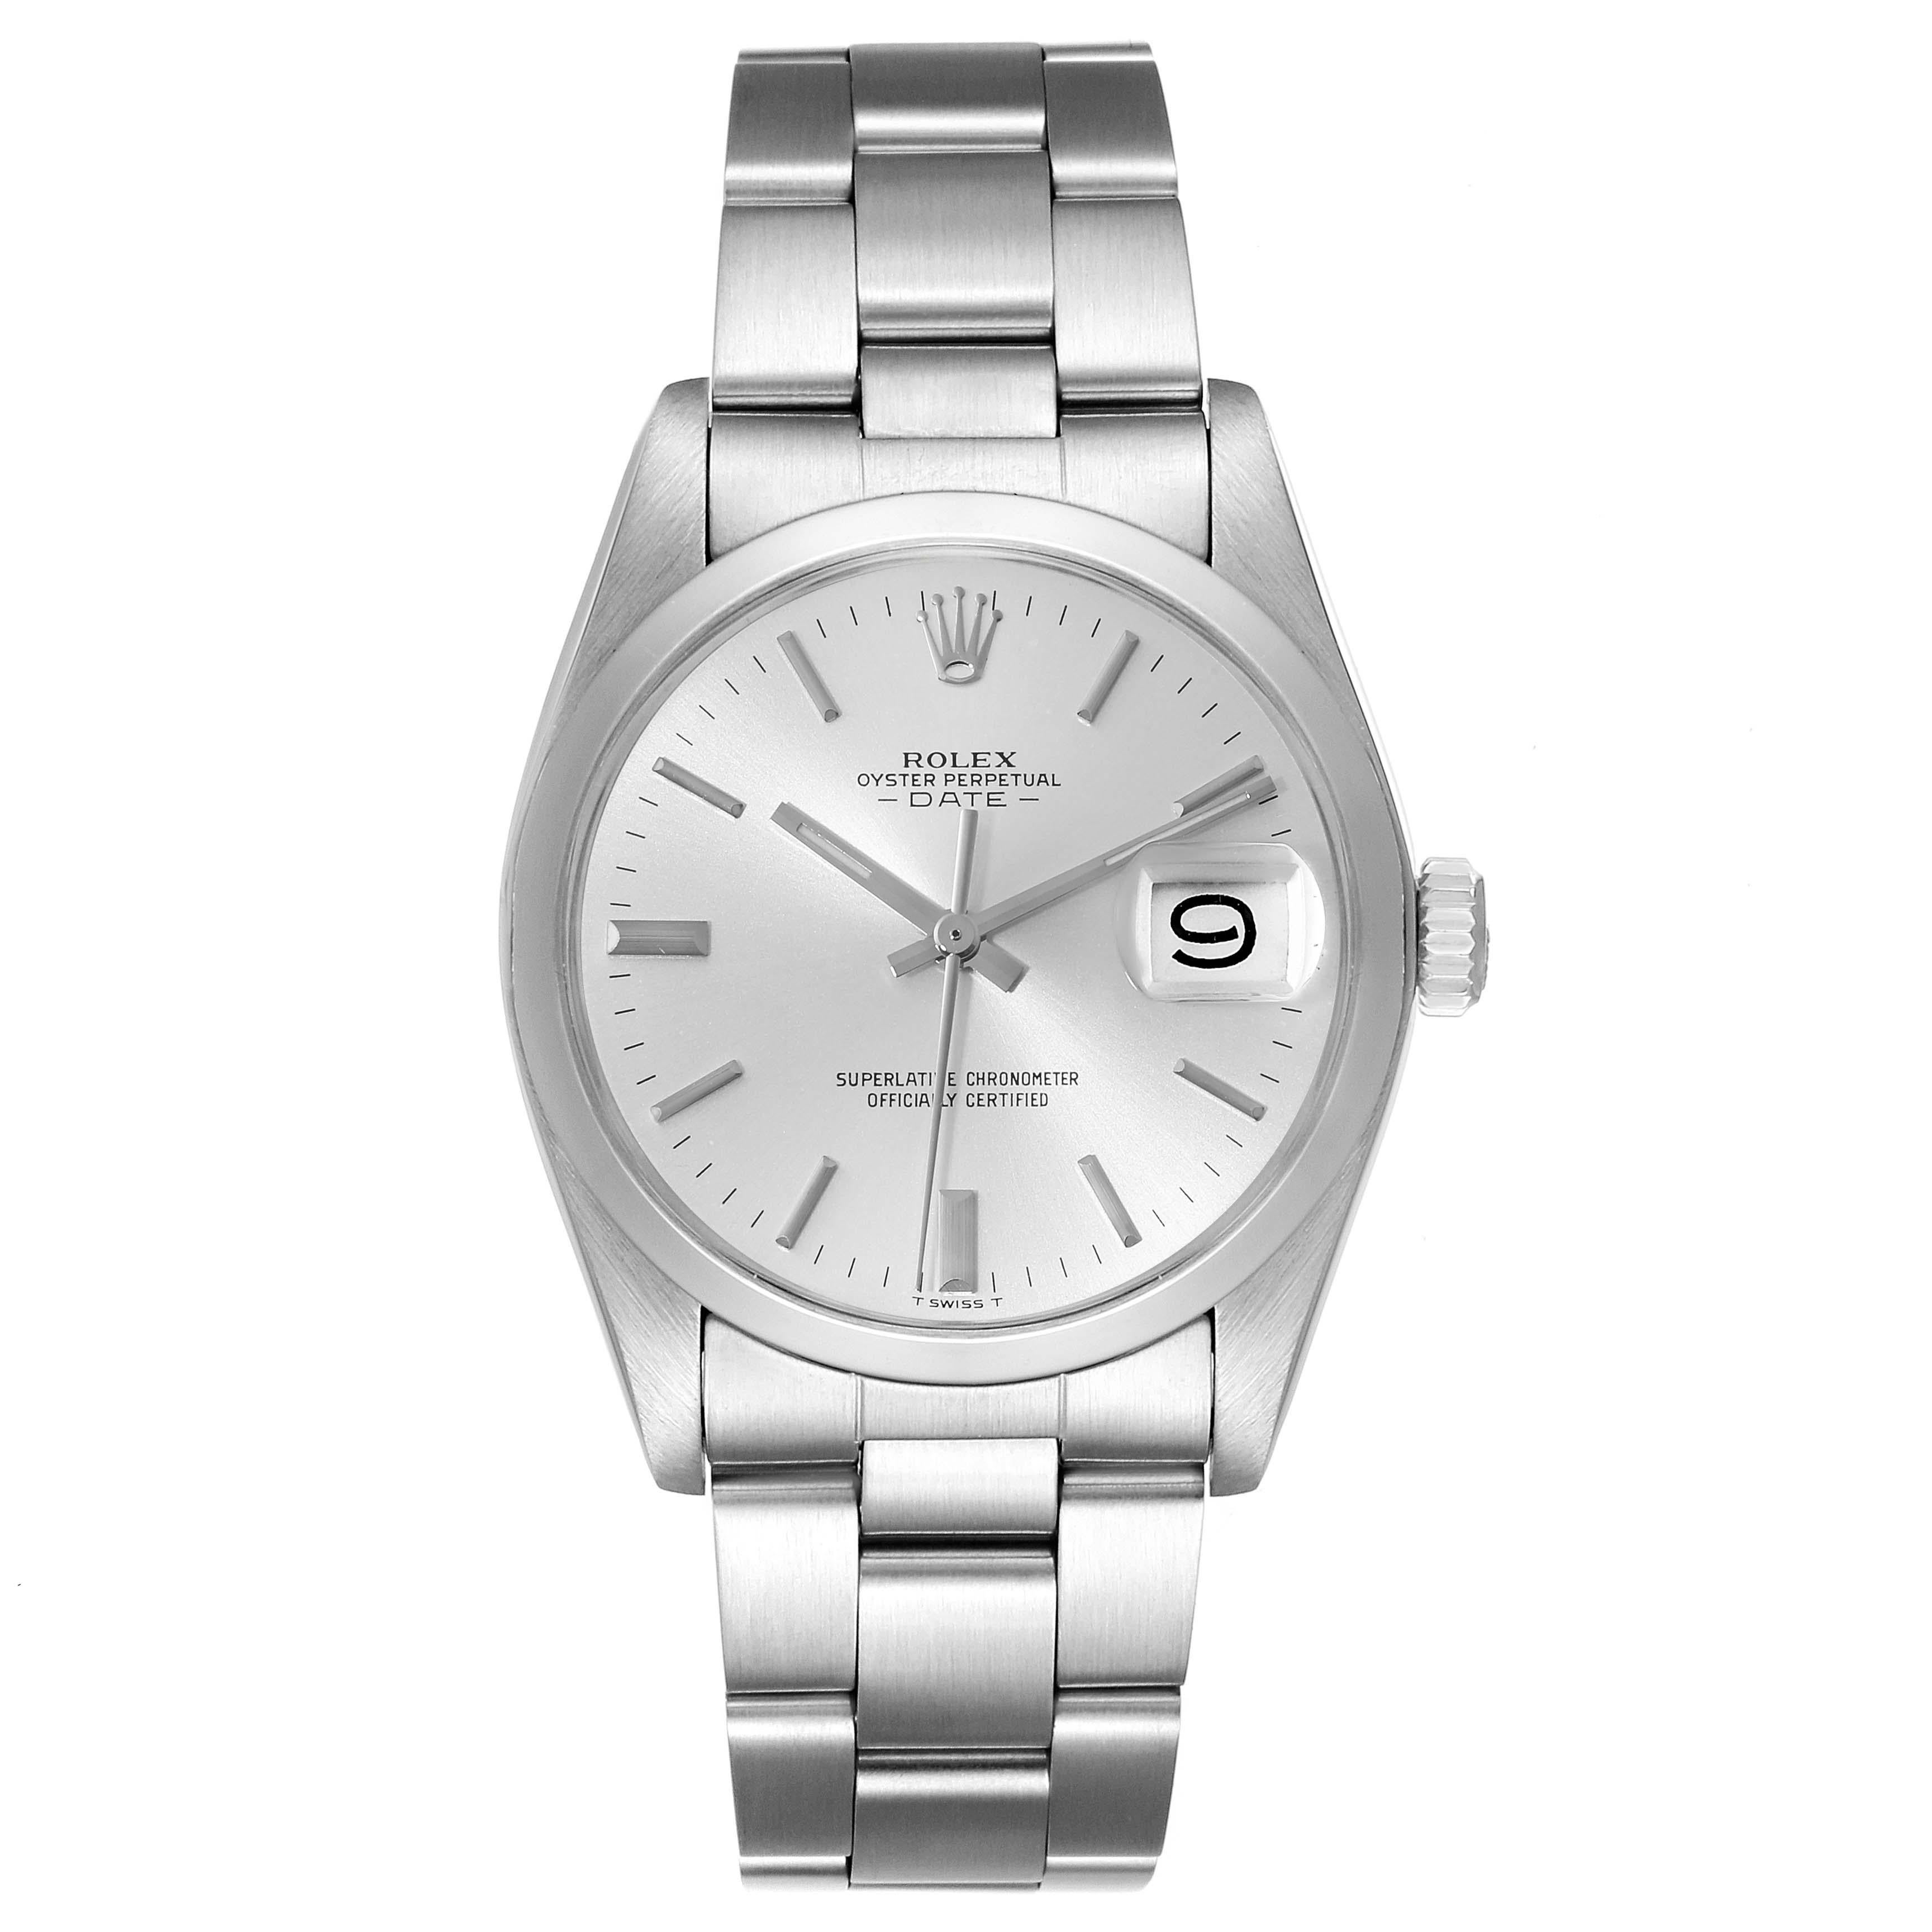 Rolex Date Silver Dial Vintage Steel Mens Watch 1500. Officially certified chronometer automatic self-winding movement. Stainless steel oyster case 34.0 mm in diameter. Rolex logo on the crown. Stainless steel smooth bezel. Acrylic crystal with